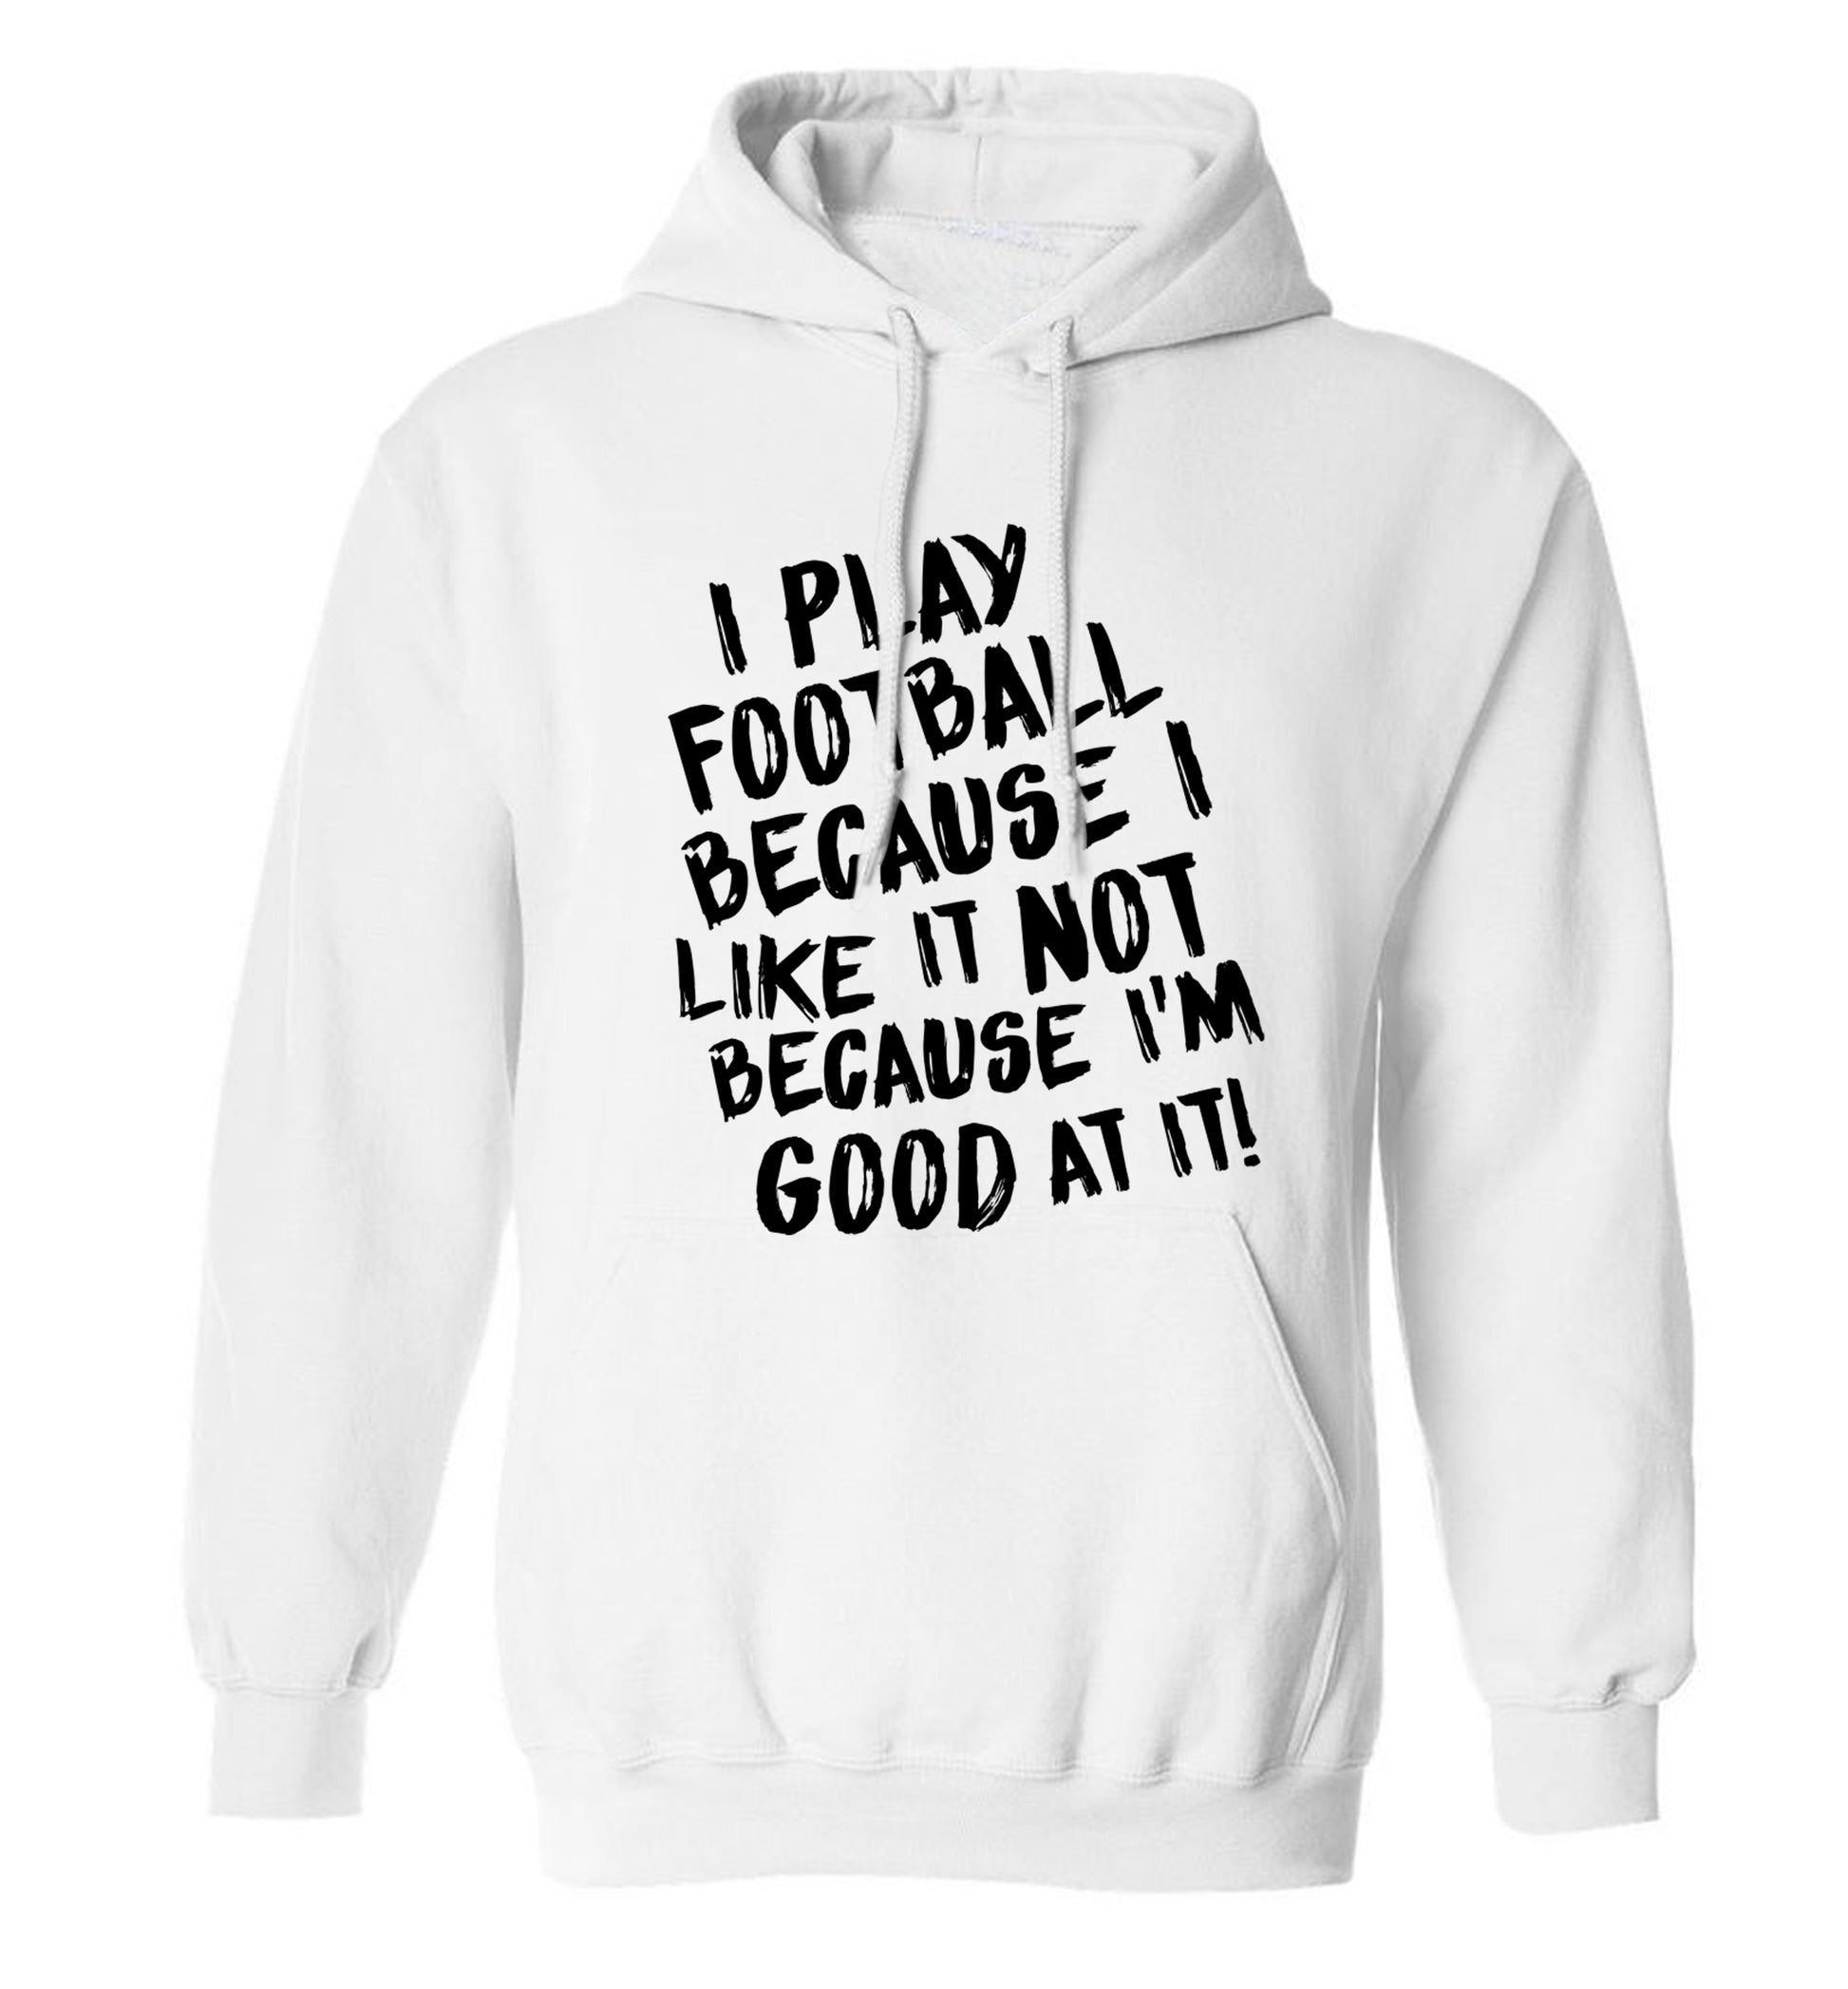 I play football because I like it not because I'm good at it adults unisexwhite hoodie 2XL